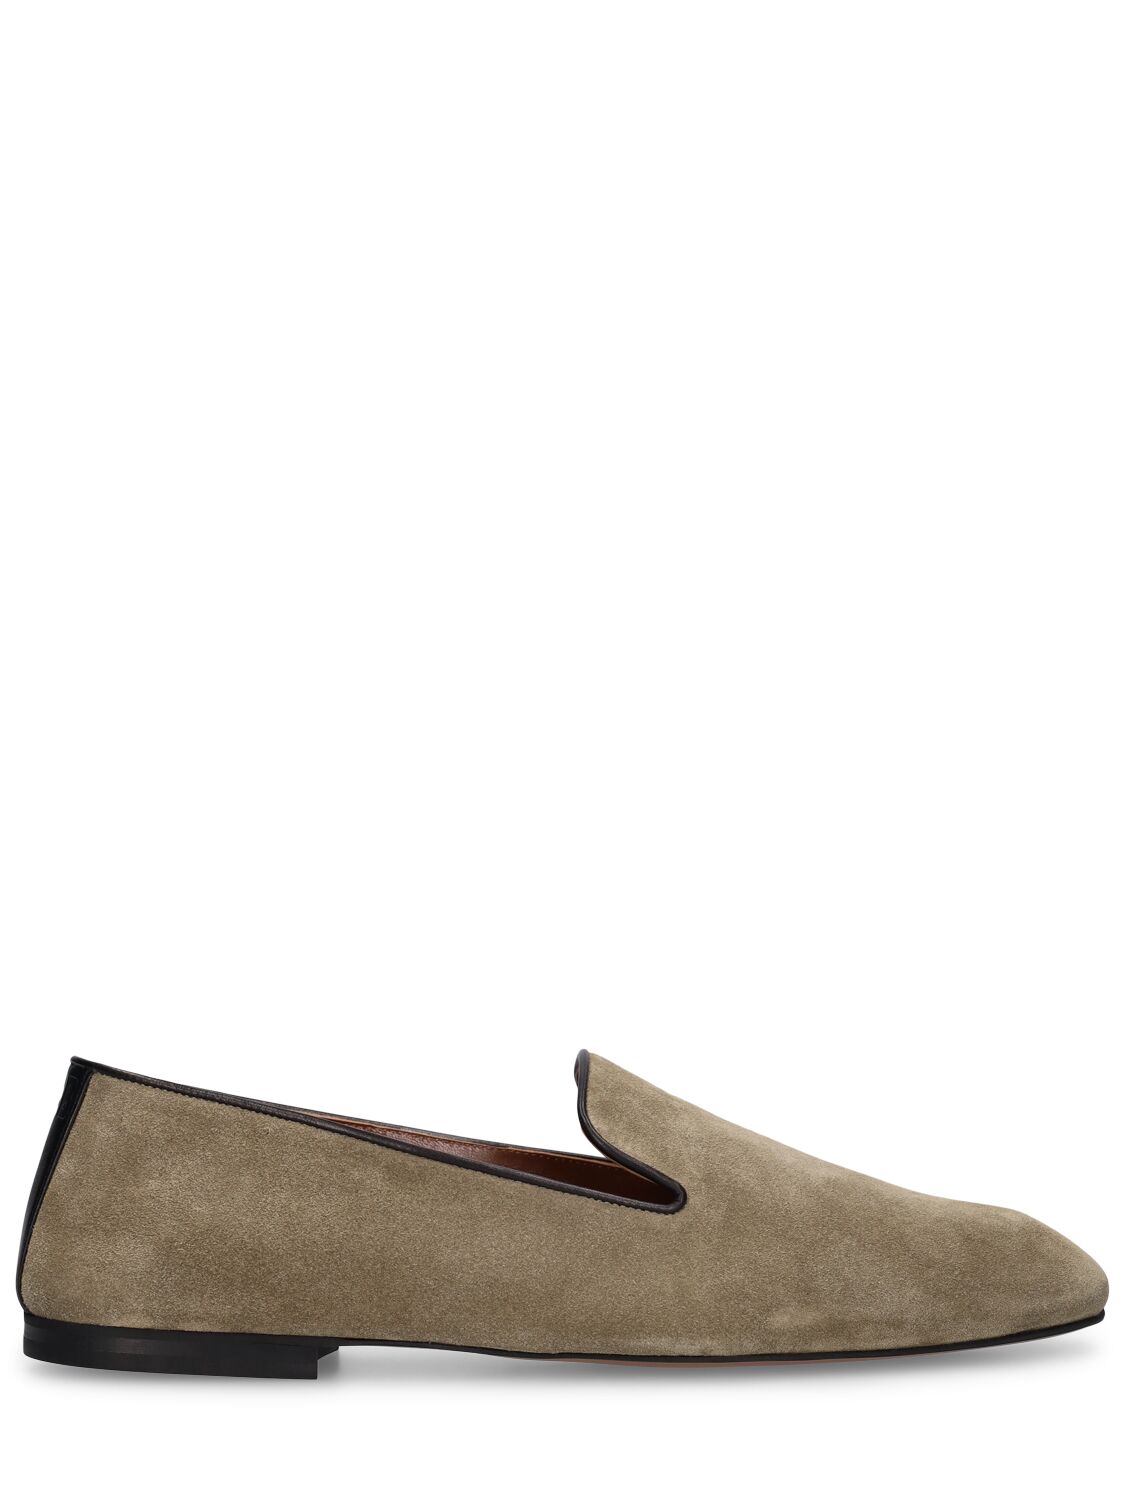 Wales Bonner Suede Loafers In Military Green